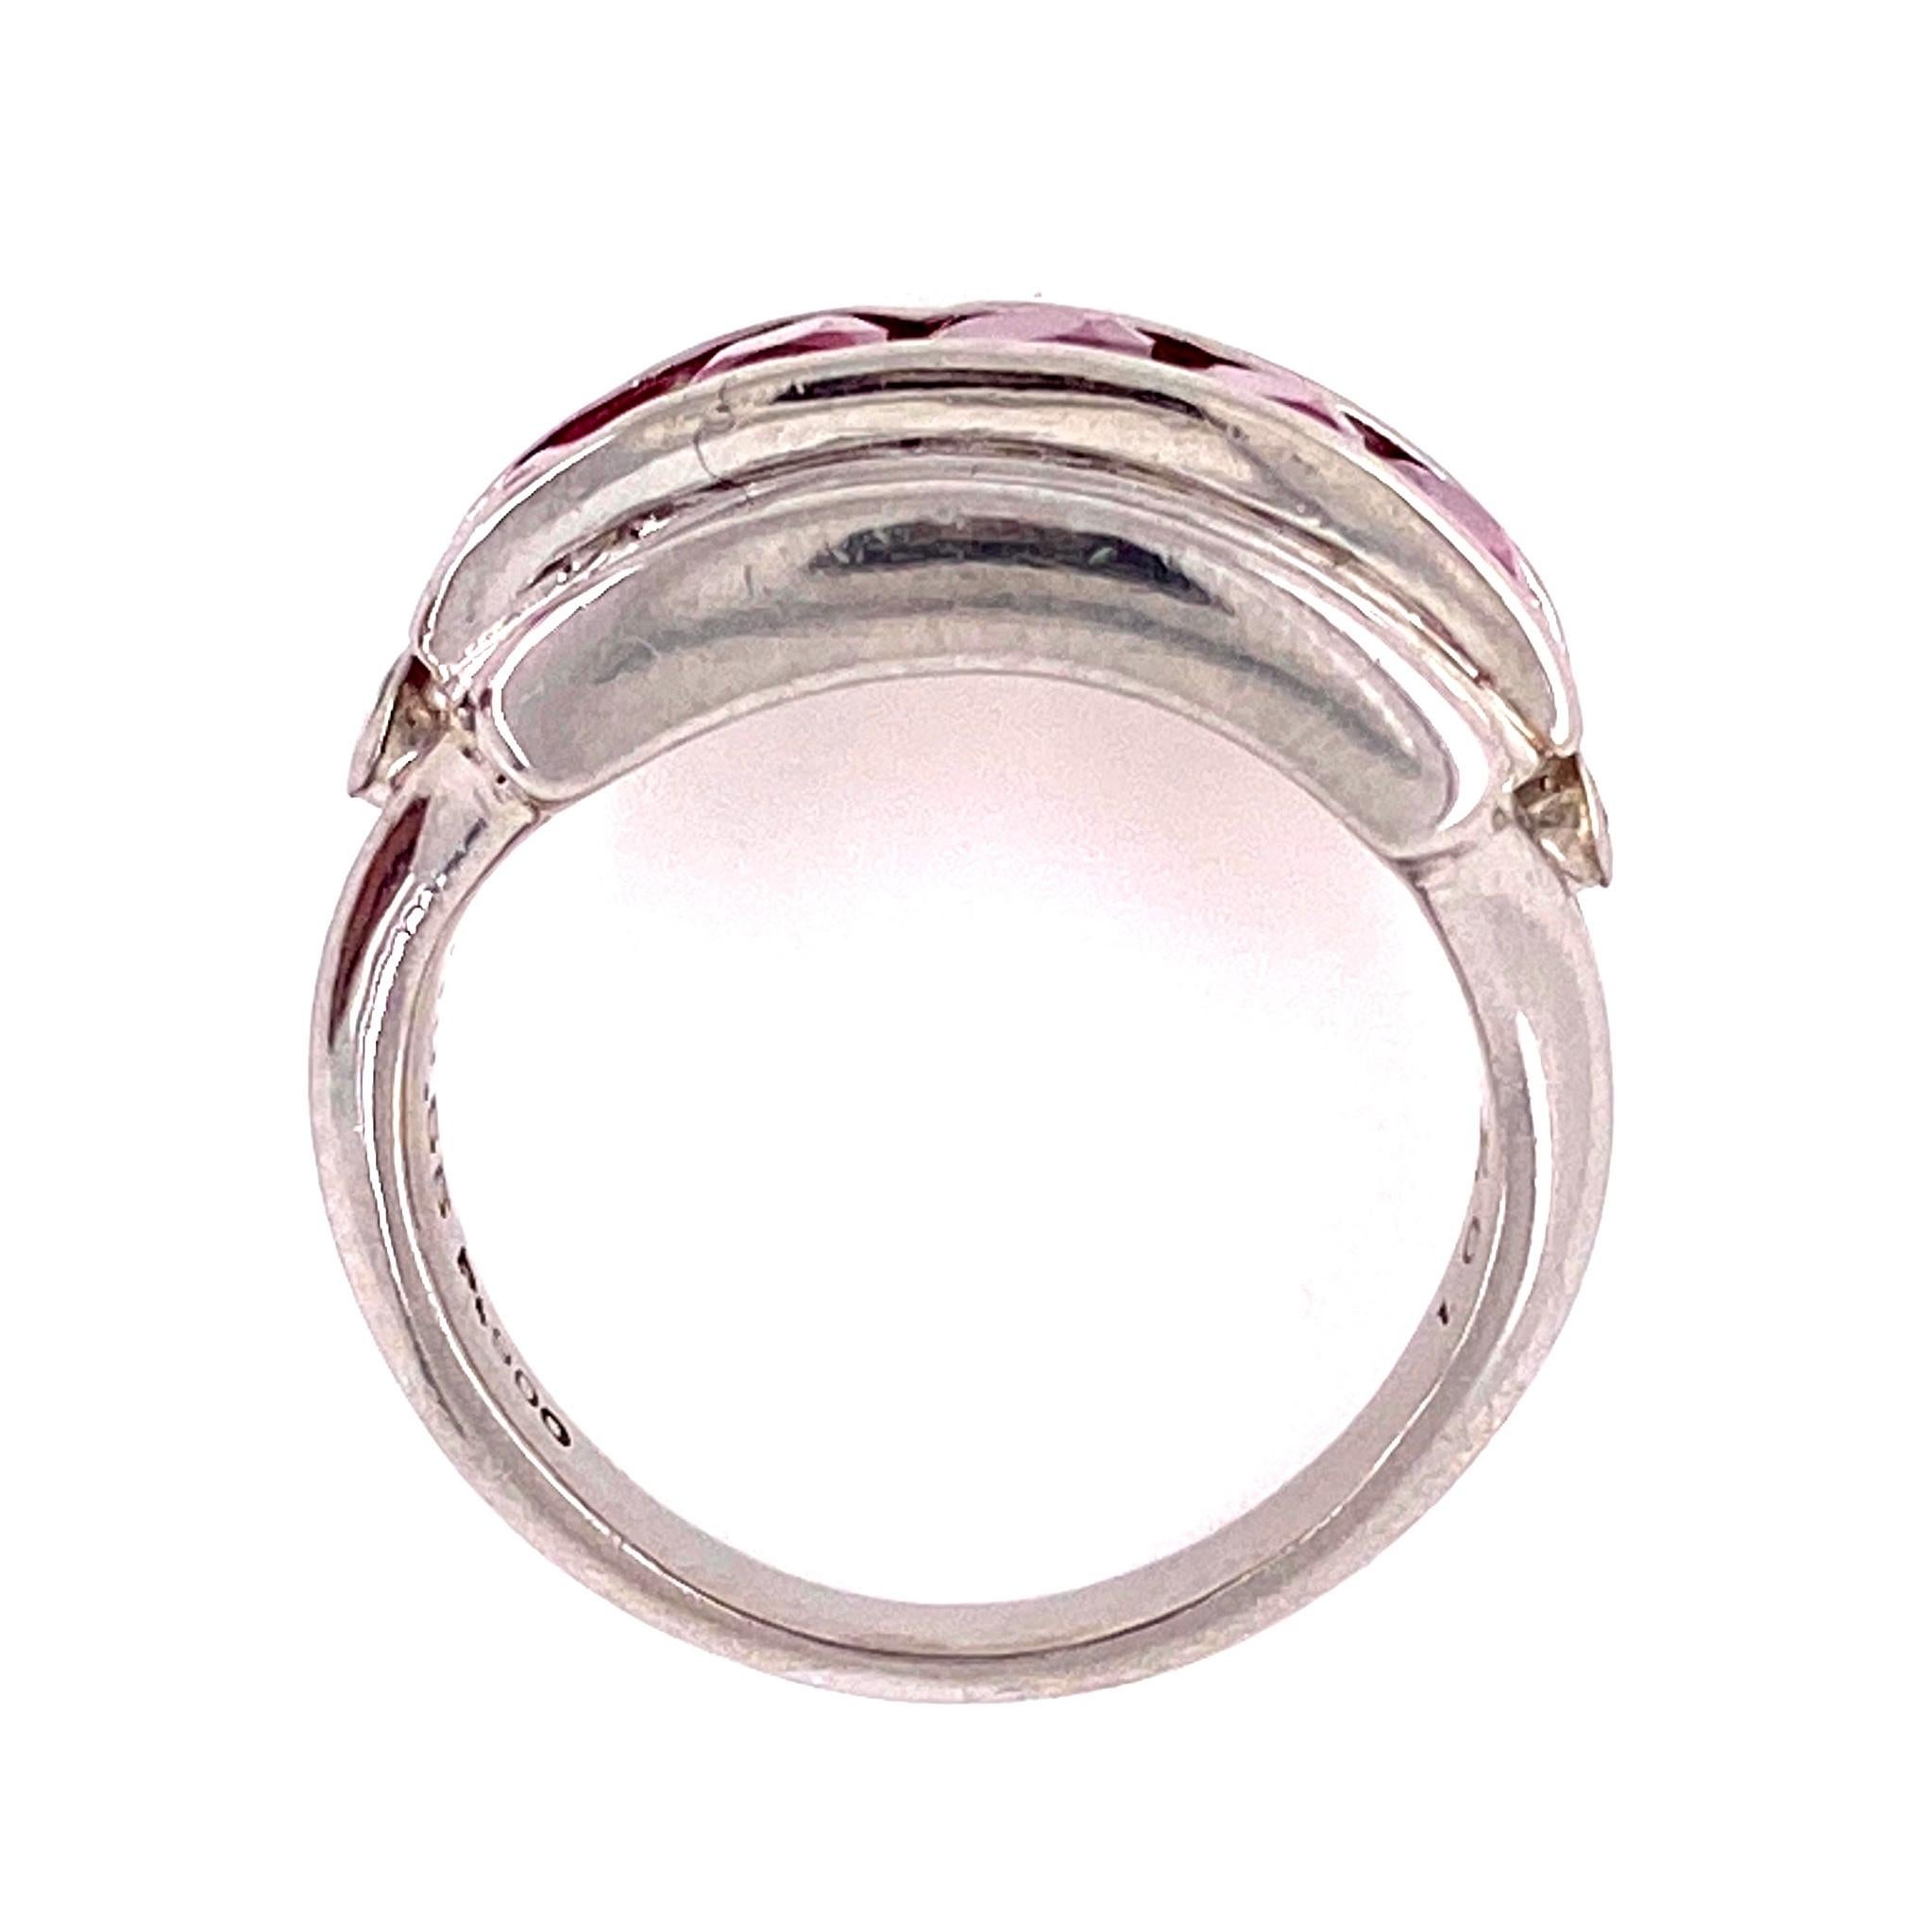 Simply Beautiful Platinum Cocktail Band Ring, securely set with 5 Fine high quality French cut Rubies, weighing approx. 2.07 total carats and Diamonds weighing approx. 0.65 total carat. Hand crafted in Platinum. Measuring approx. 0.75”w x 0.39”h x